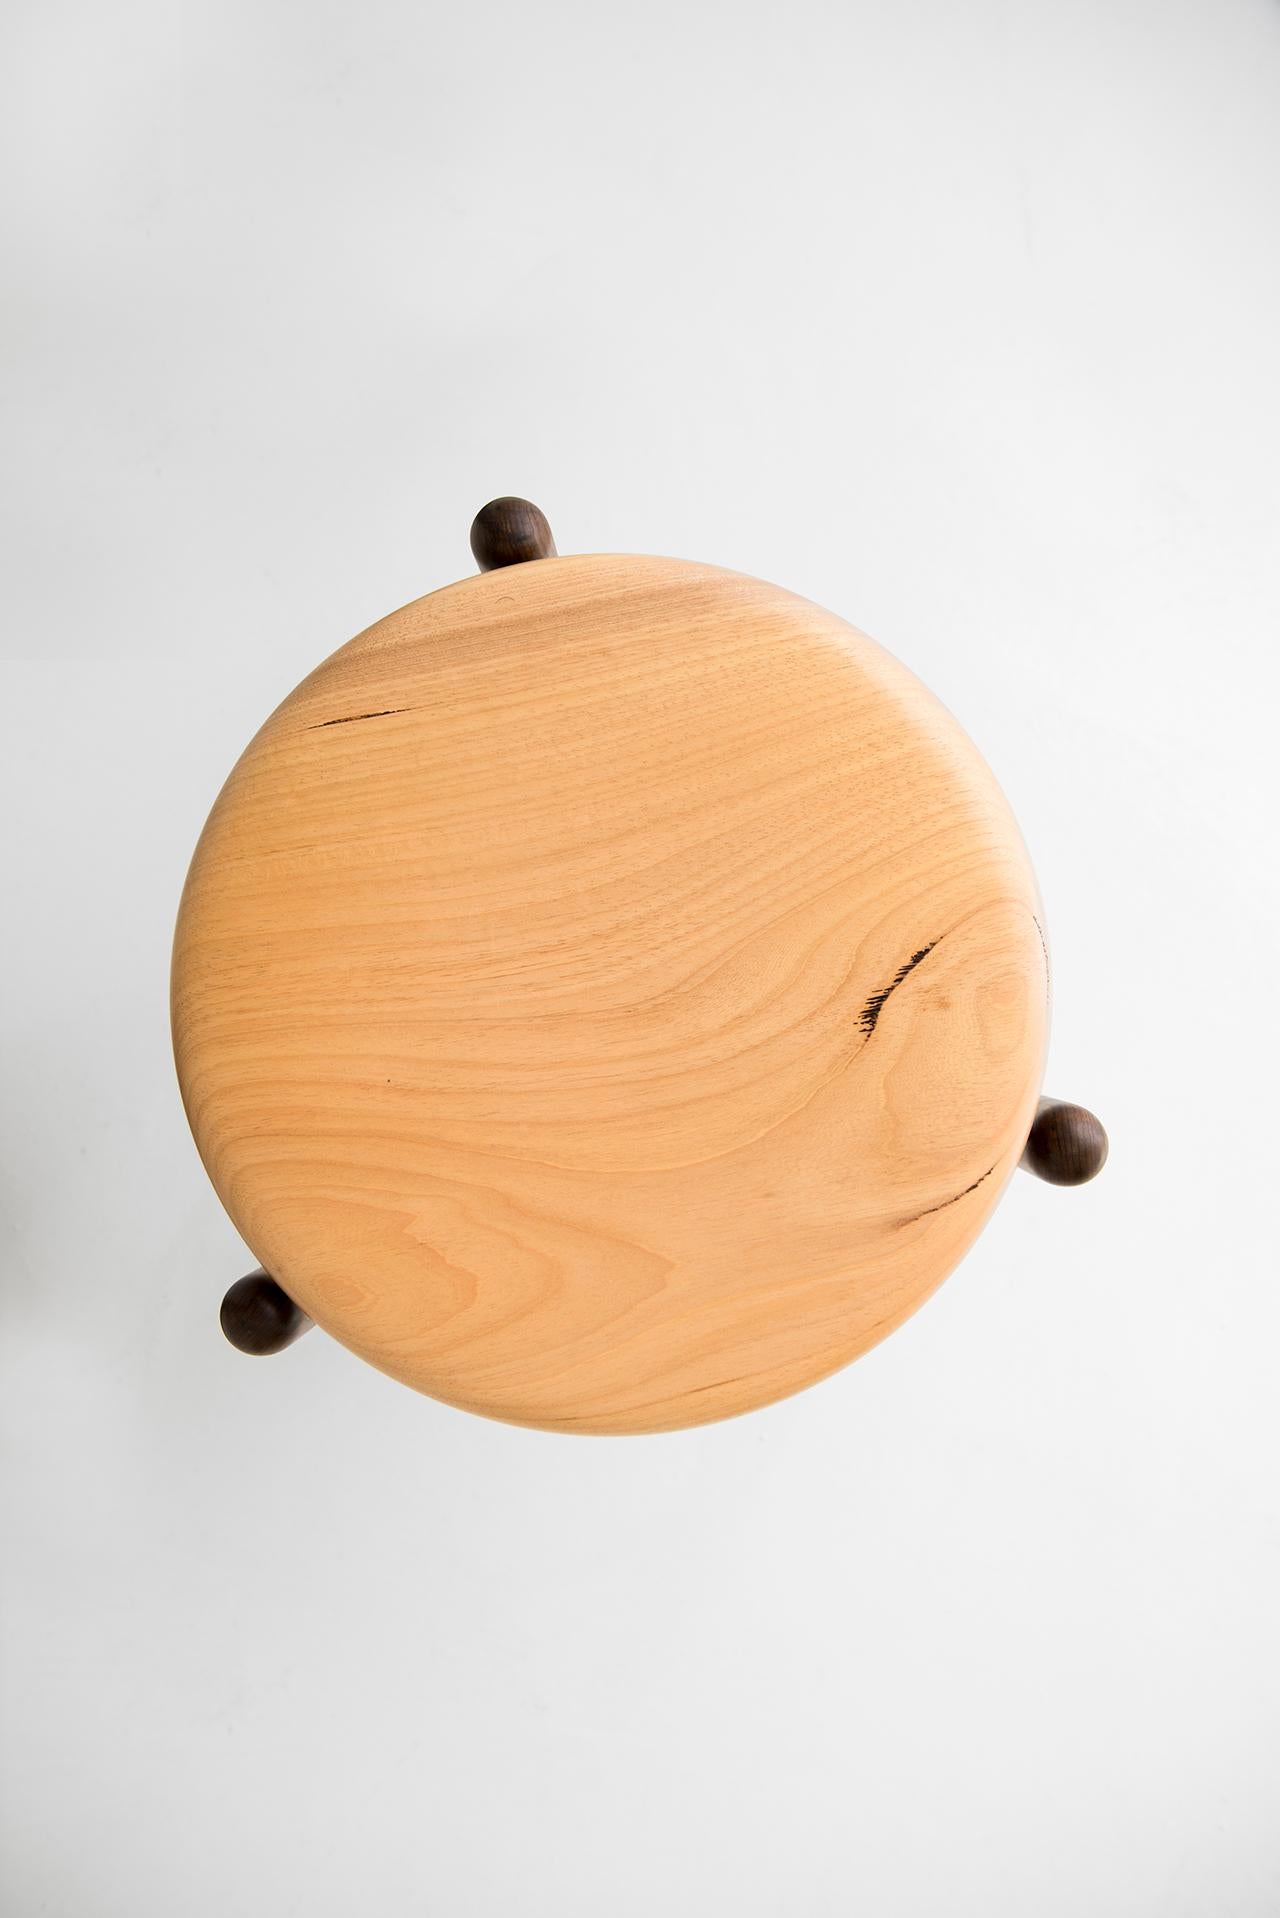 Brass and Wood Sculpted Stool, Leandro Garcia, Contemporary Brazil Design 1